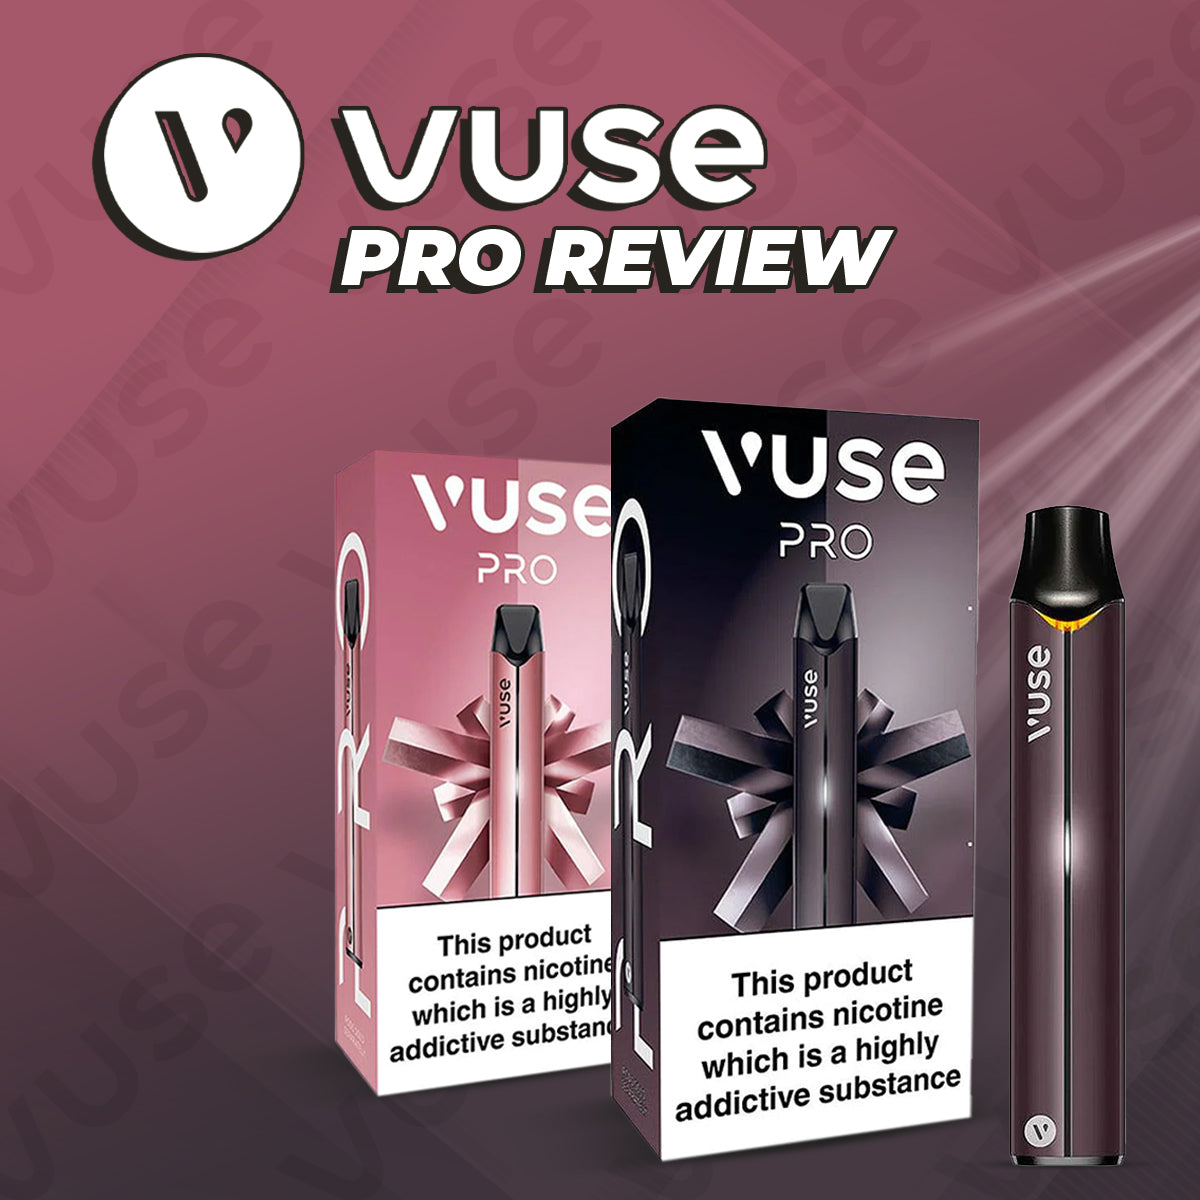 Vuse Pro Reviewed